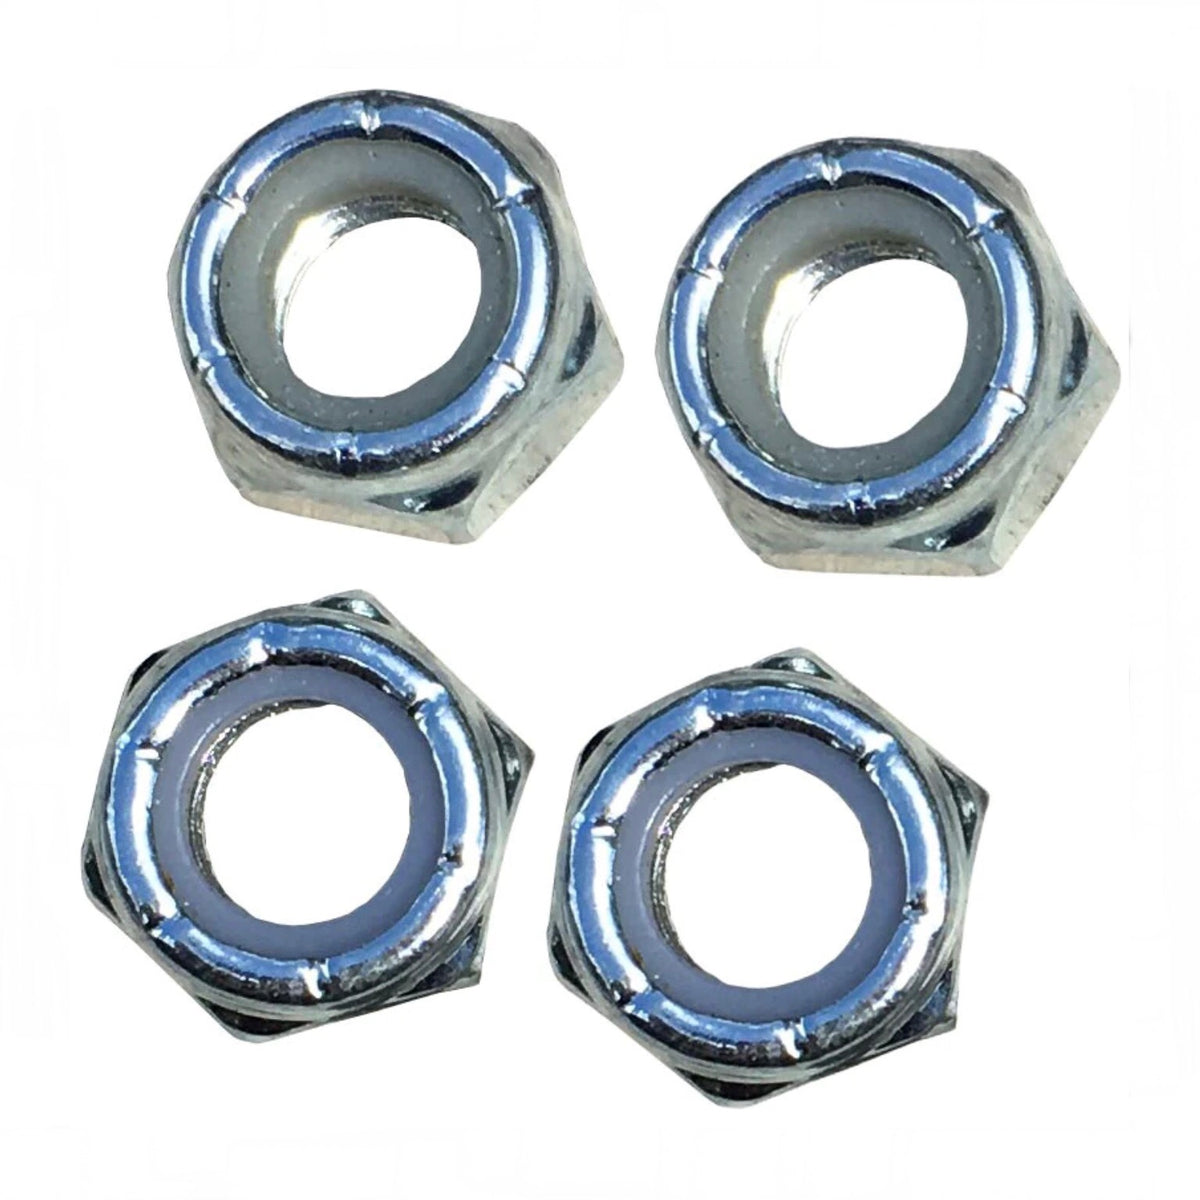 Axle Nuts (4)